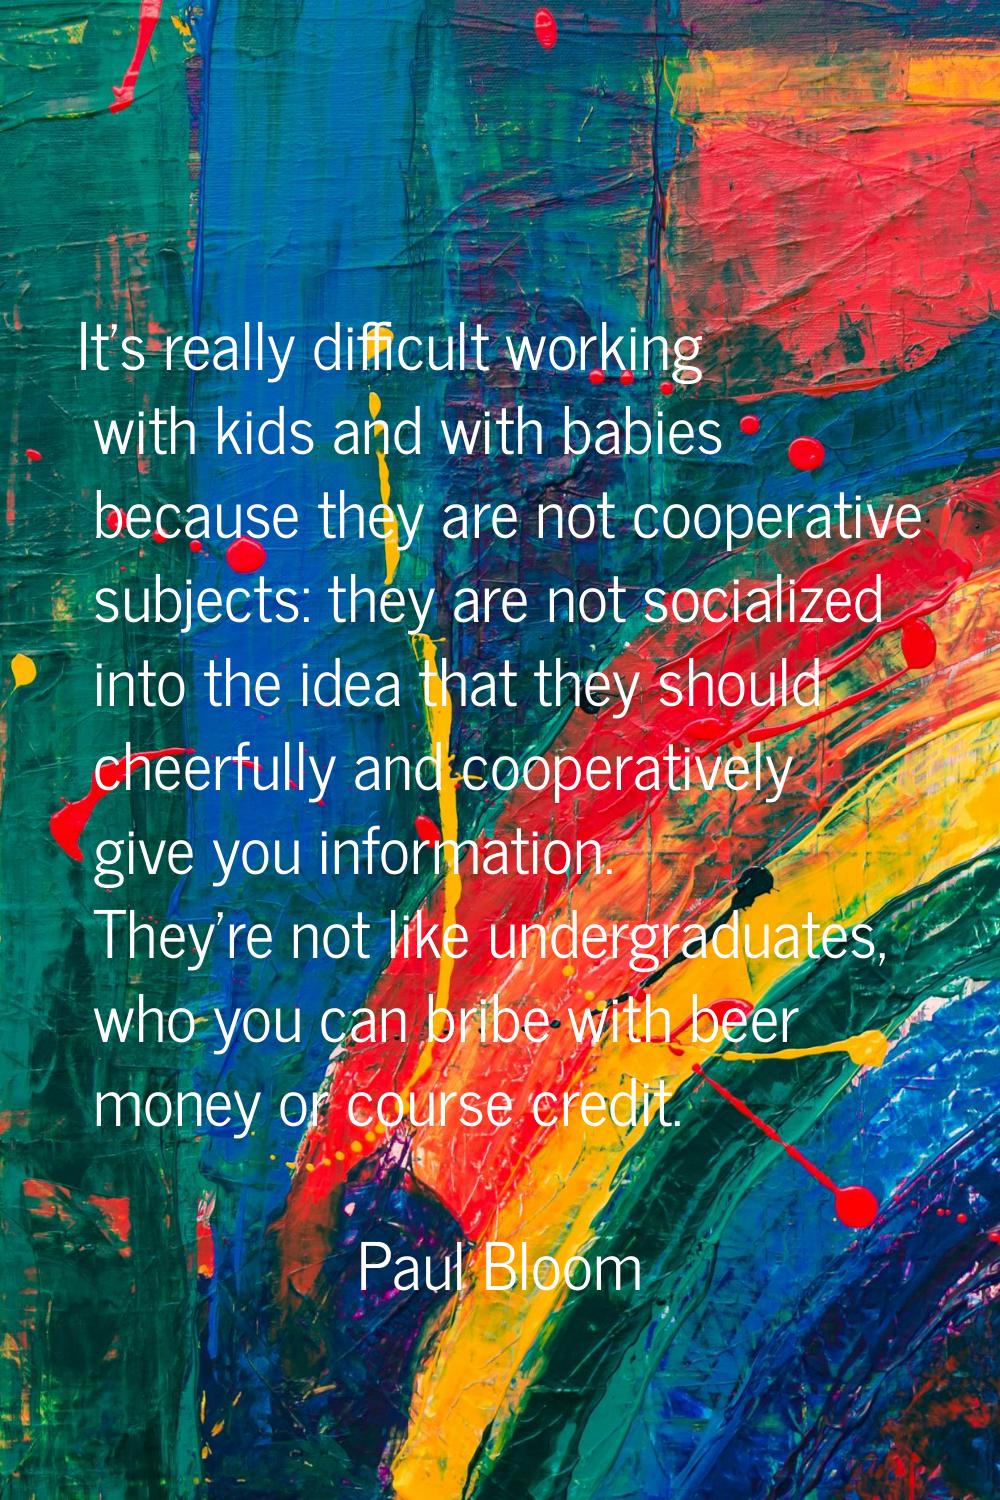 It's really difficult working with kids and with babies because they are not cooperative subjects: 